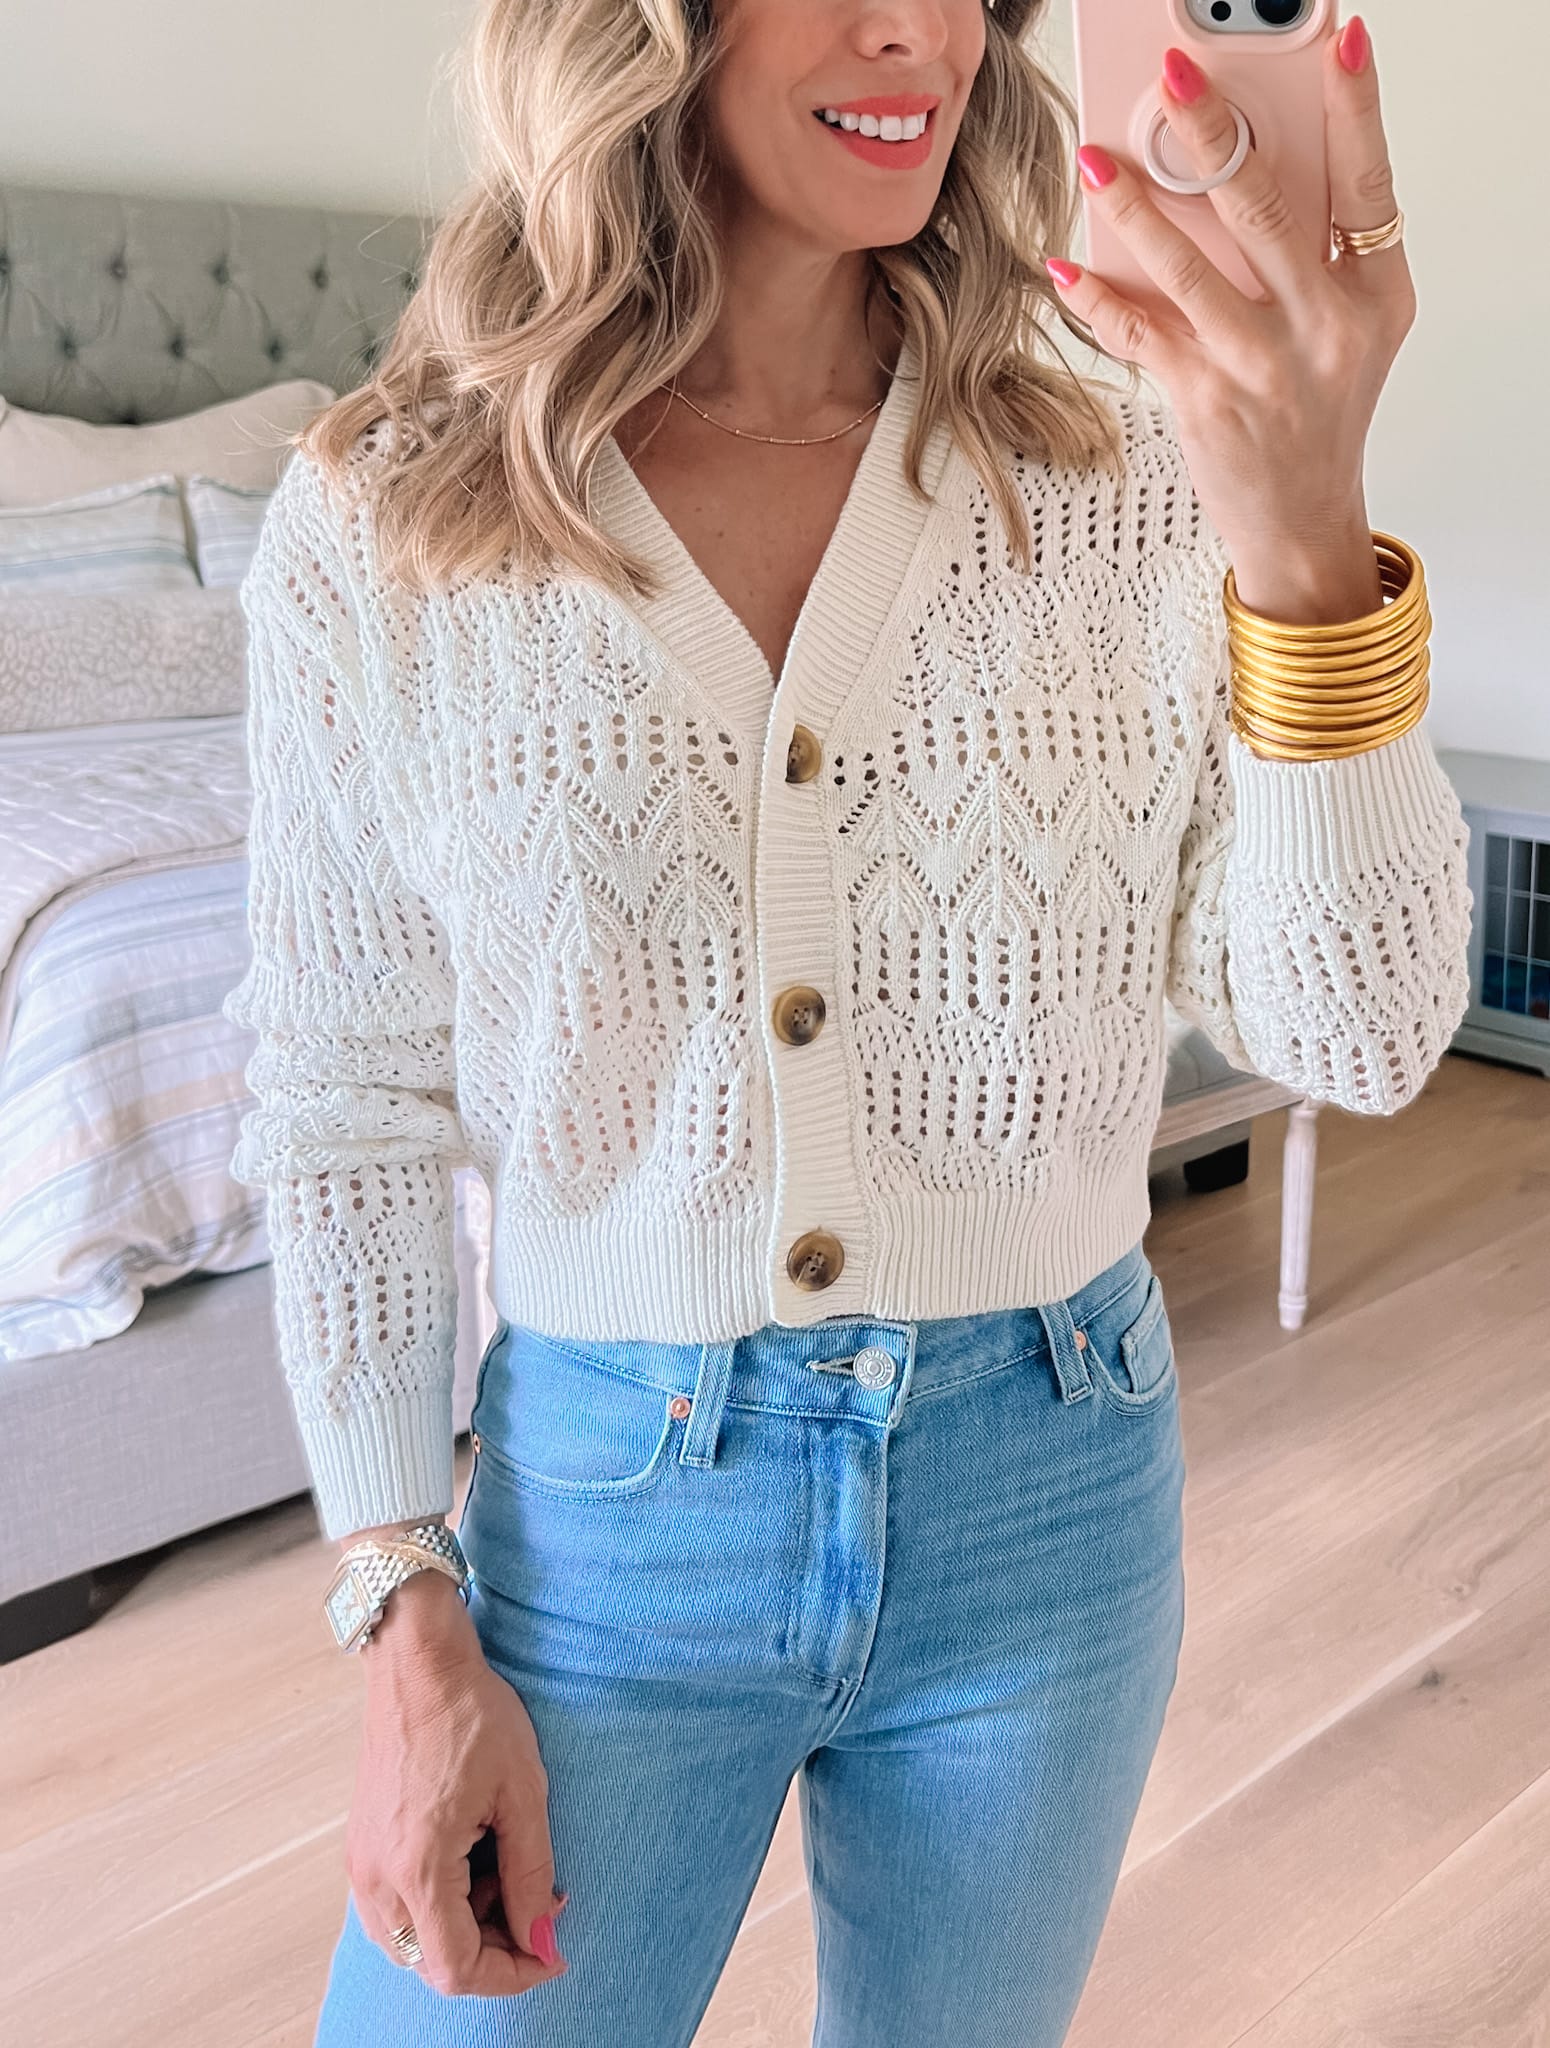 Sweater, Jeans 